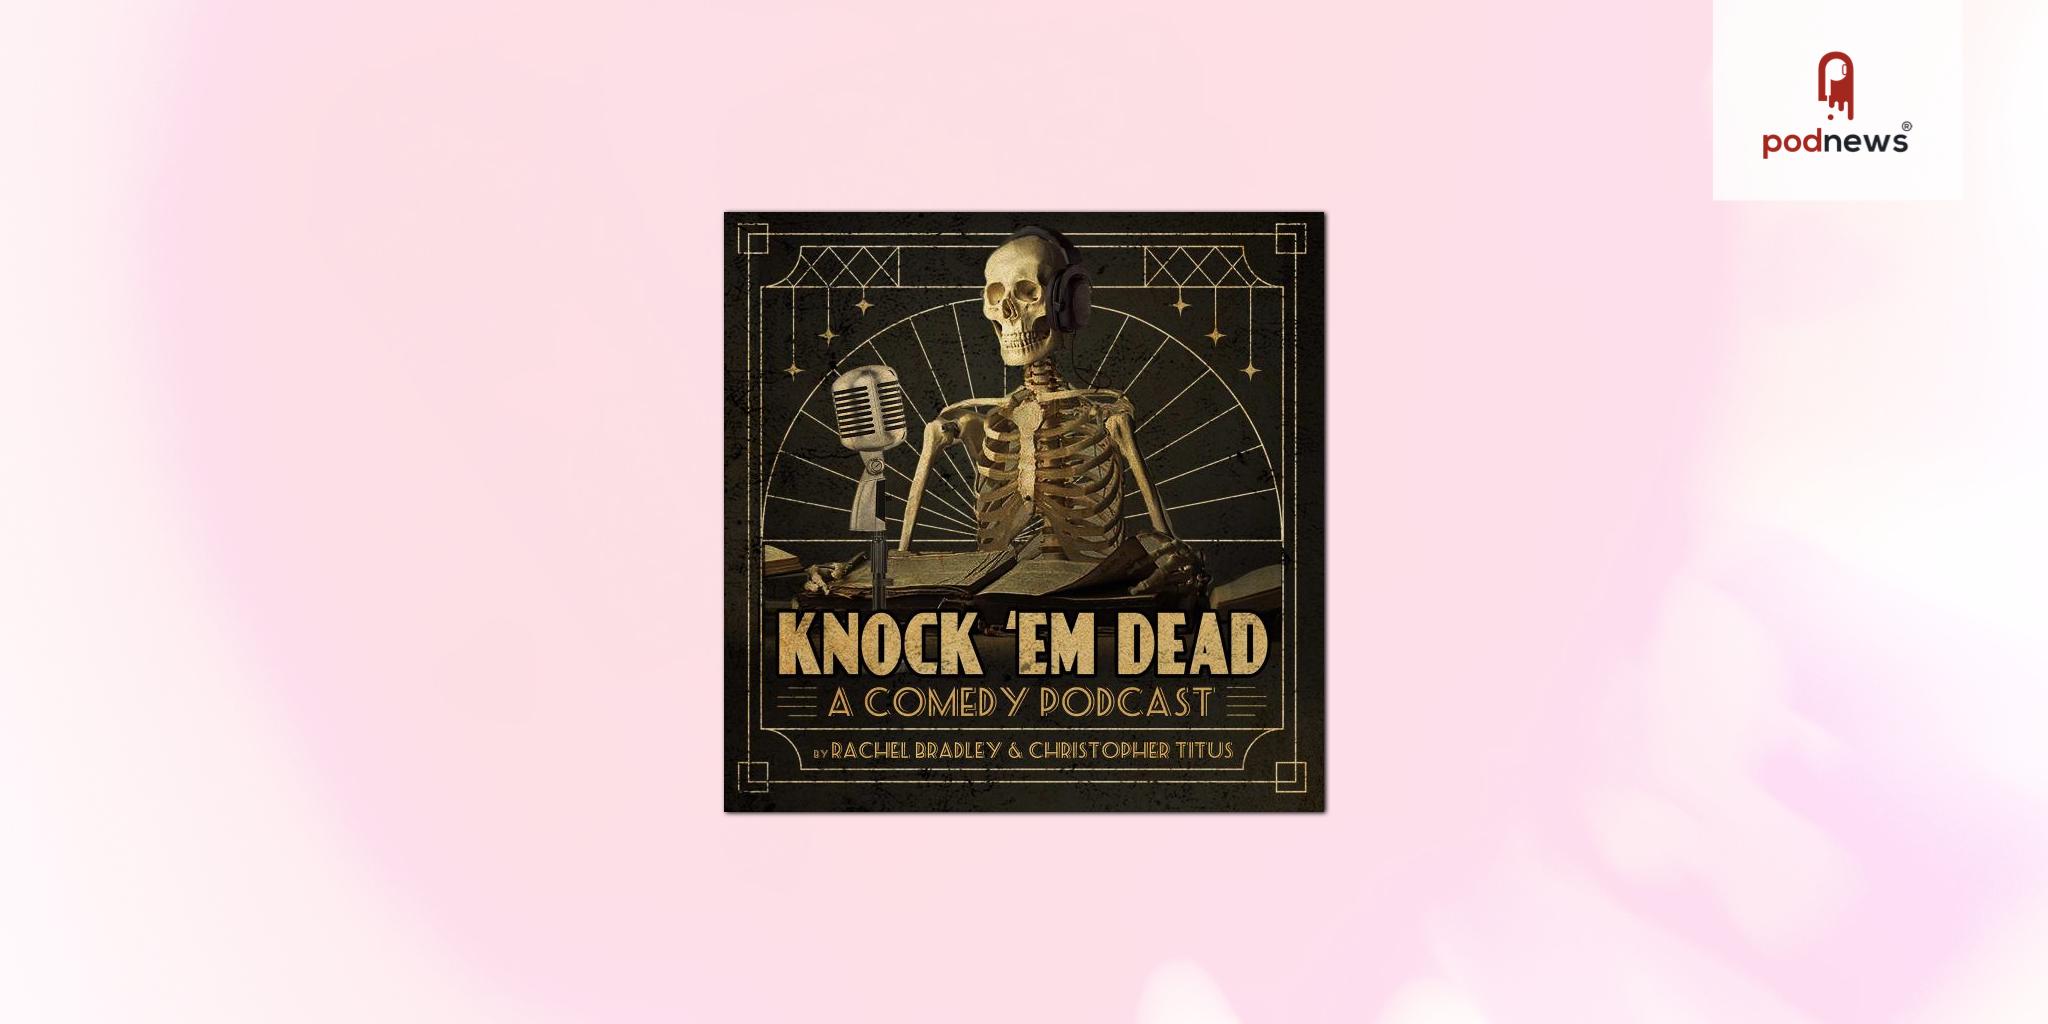 Libsyn’s AdvertiseCast Signs Exclusive Ad Partnership with Knock ‘Em Dead